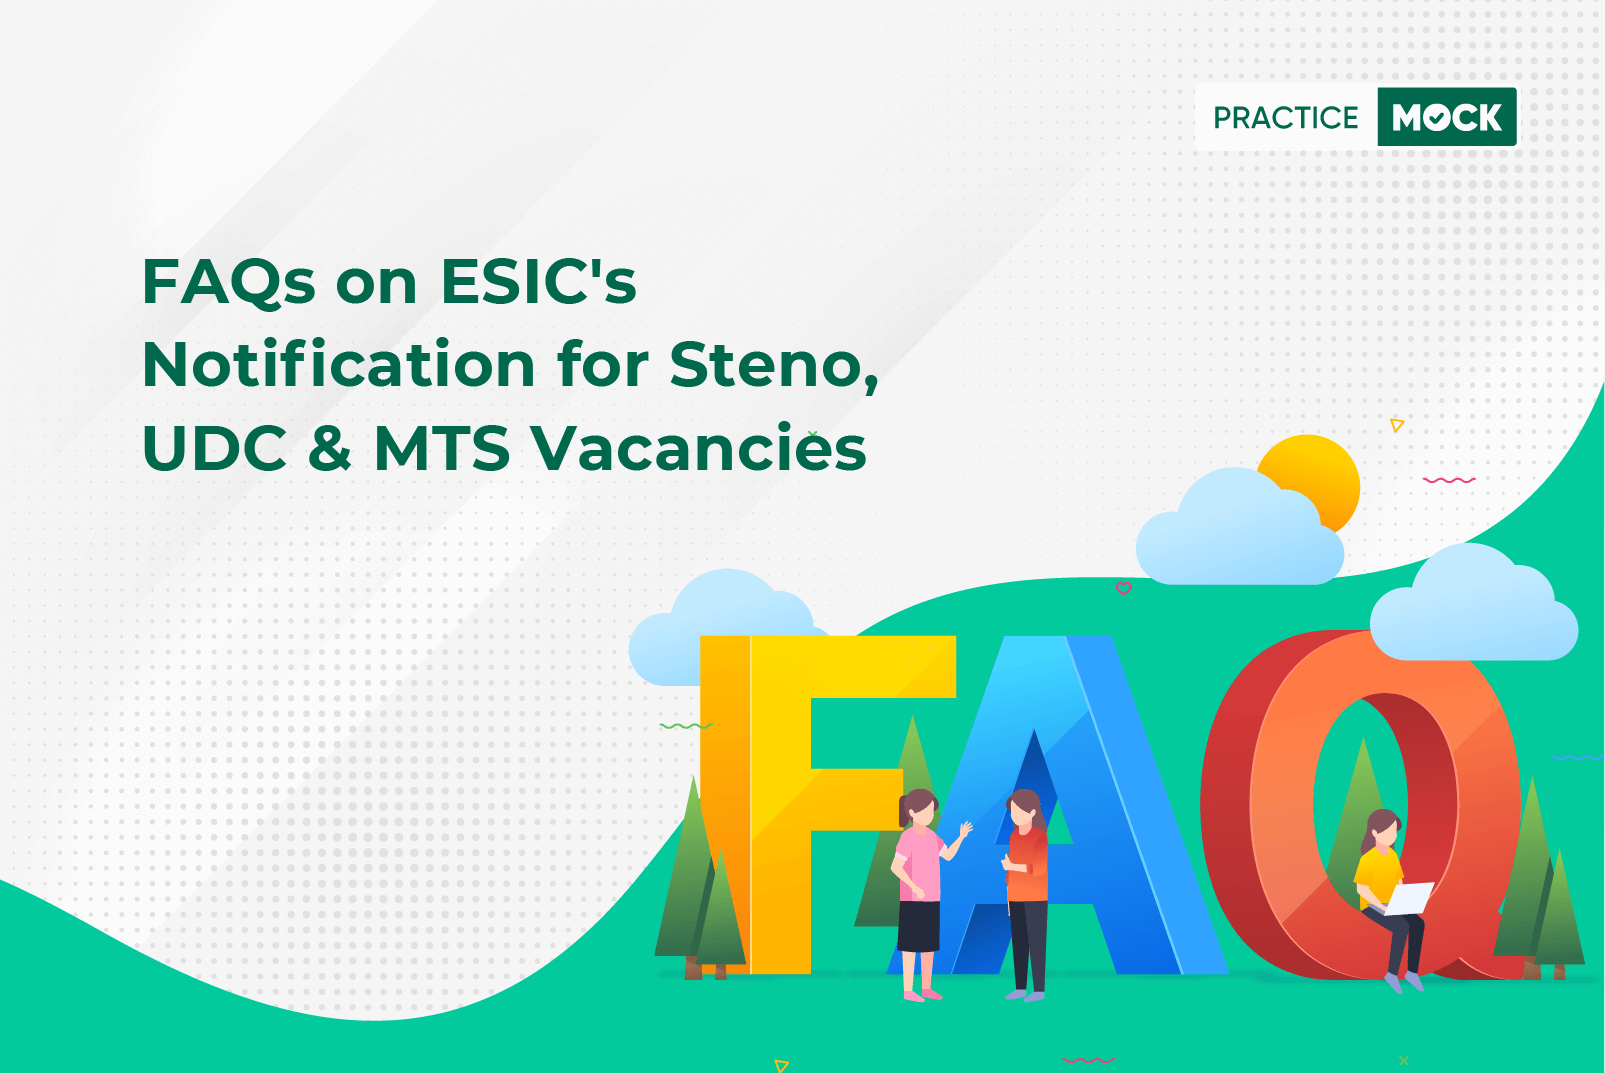 FAQs on ESIC's Notification for Steno, UDC & MTS Vacancies